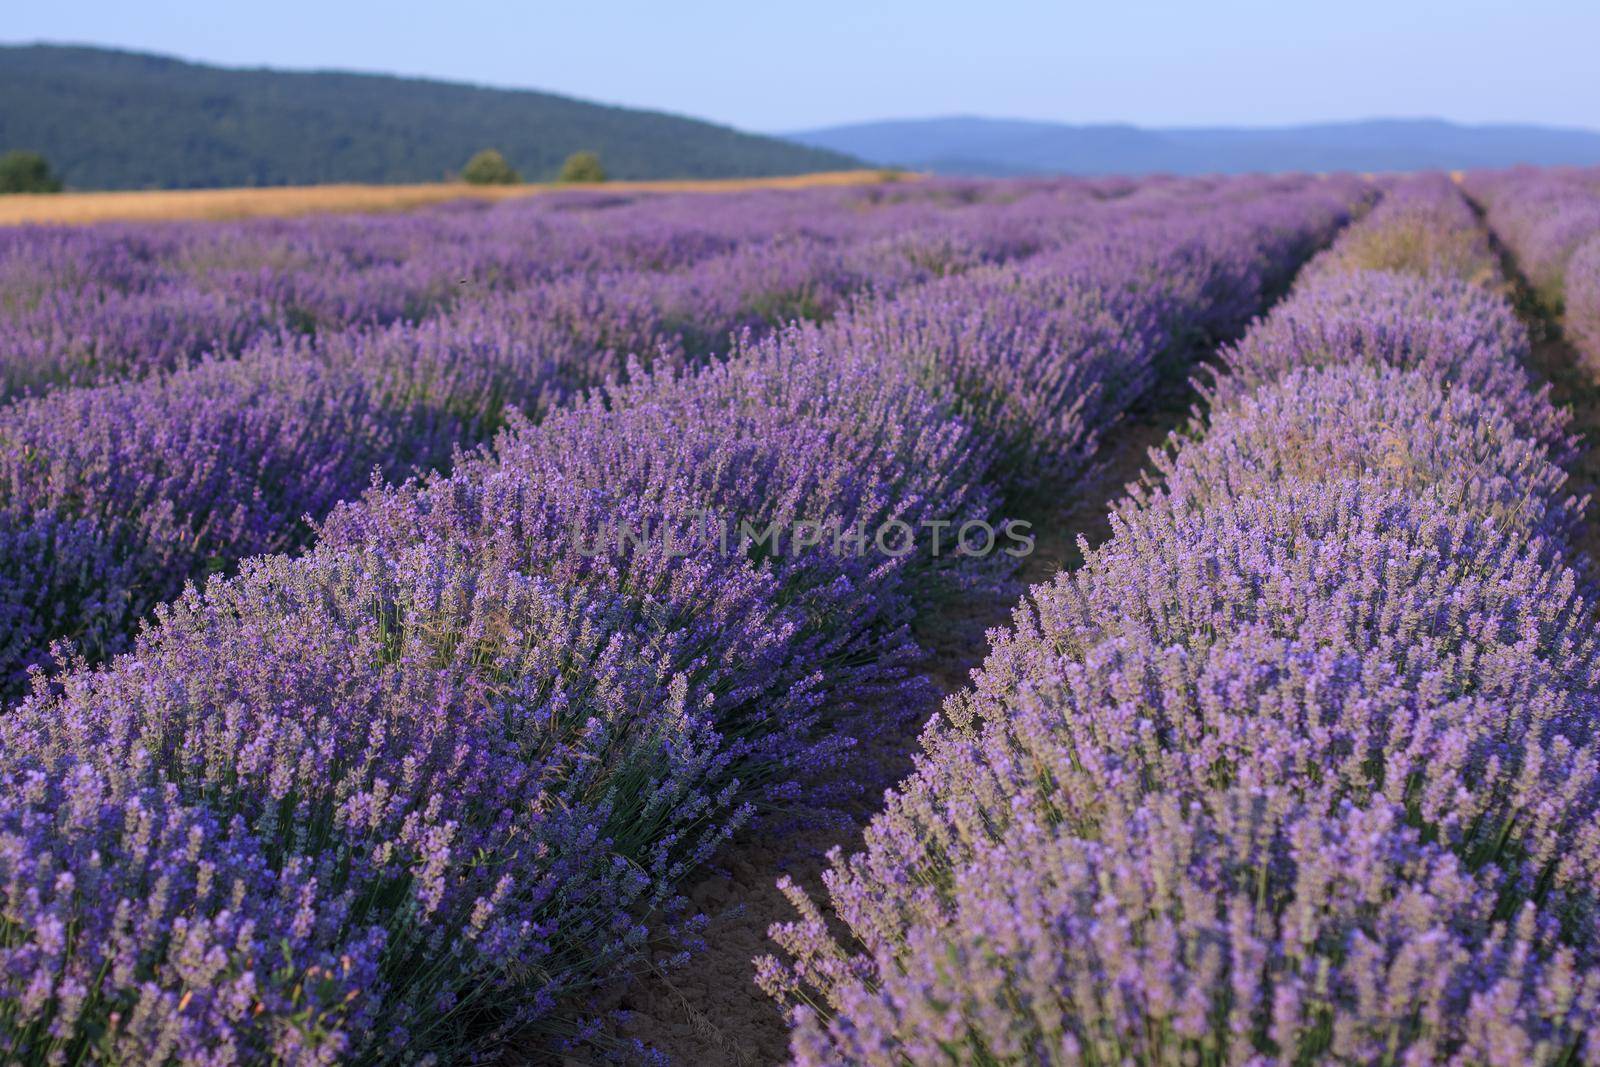 Beautiful landscape with rows of purple lavender bushes and blue sky